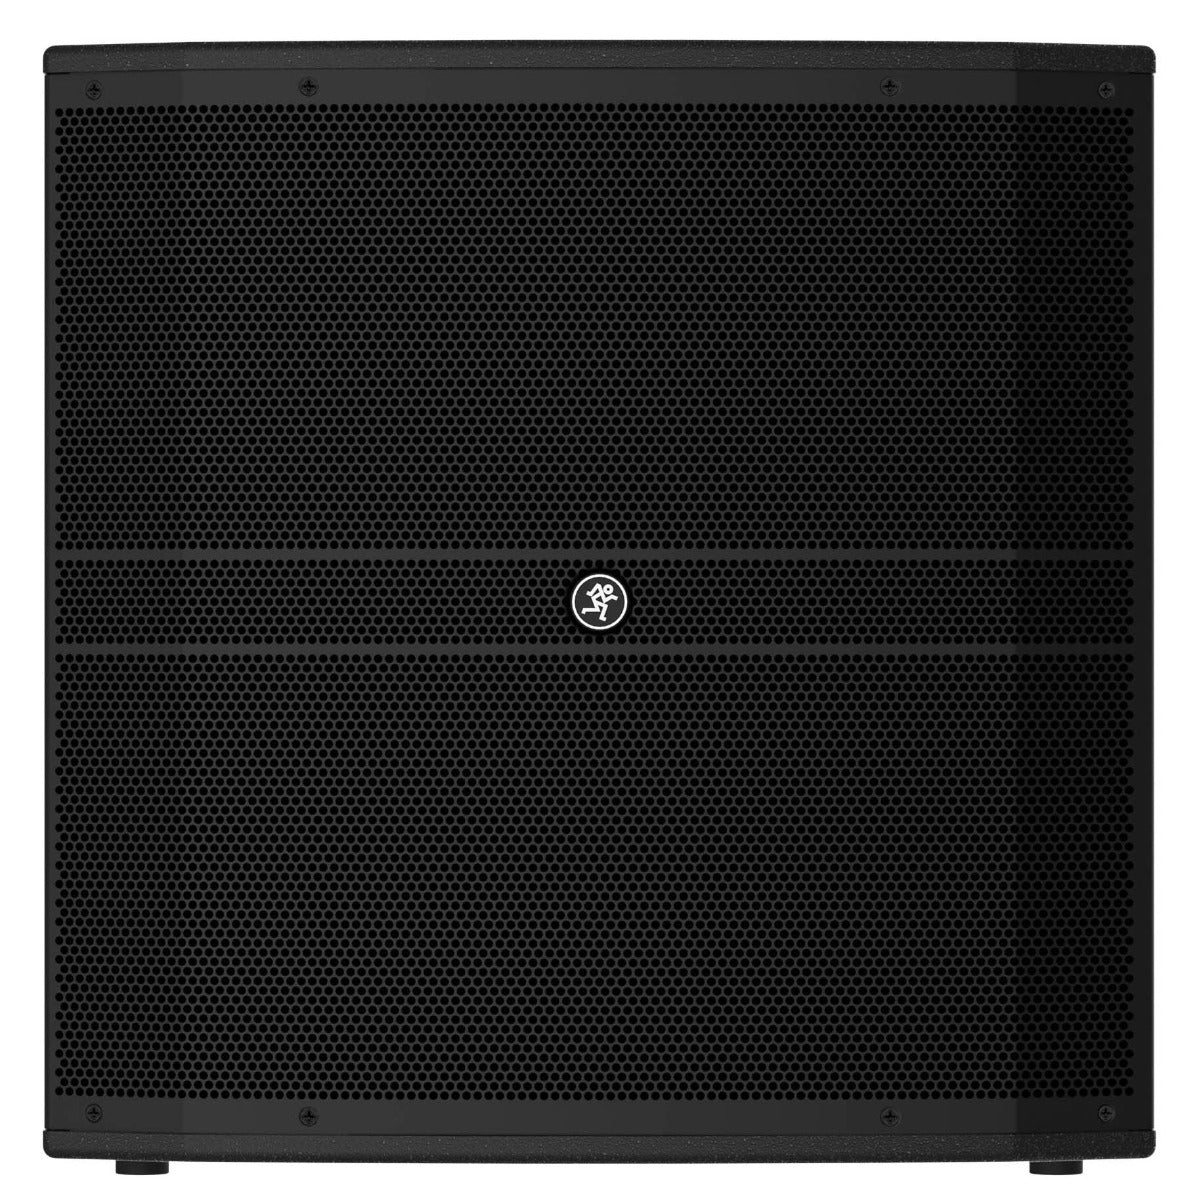 Mackie DRM18S-P 18" Passive Subwoofer